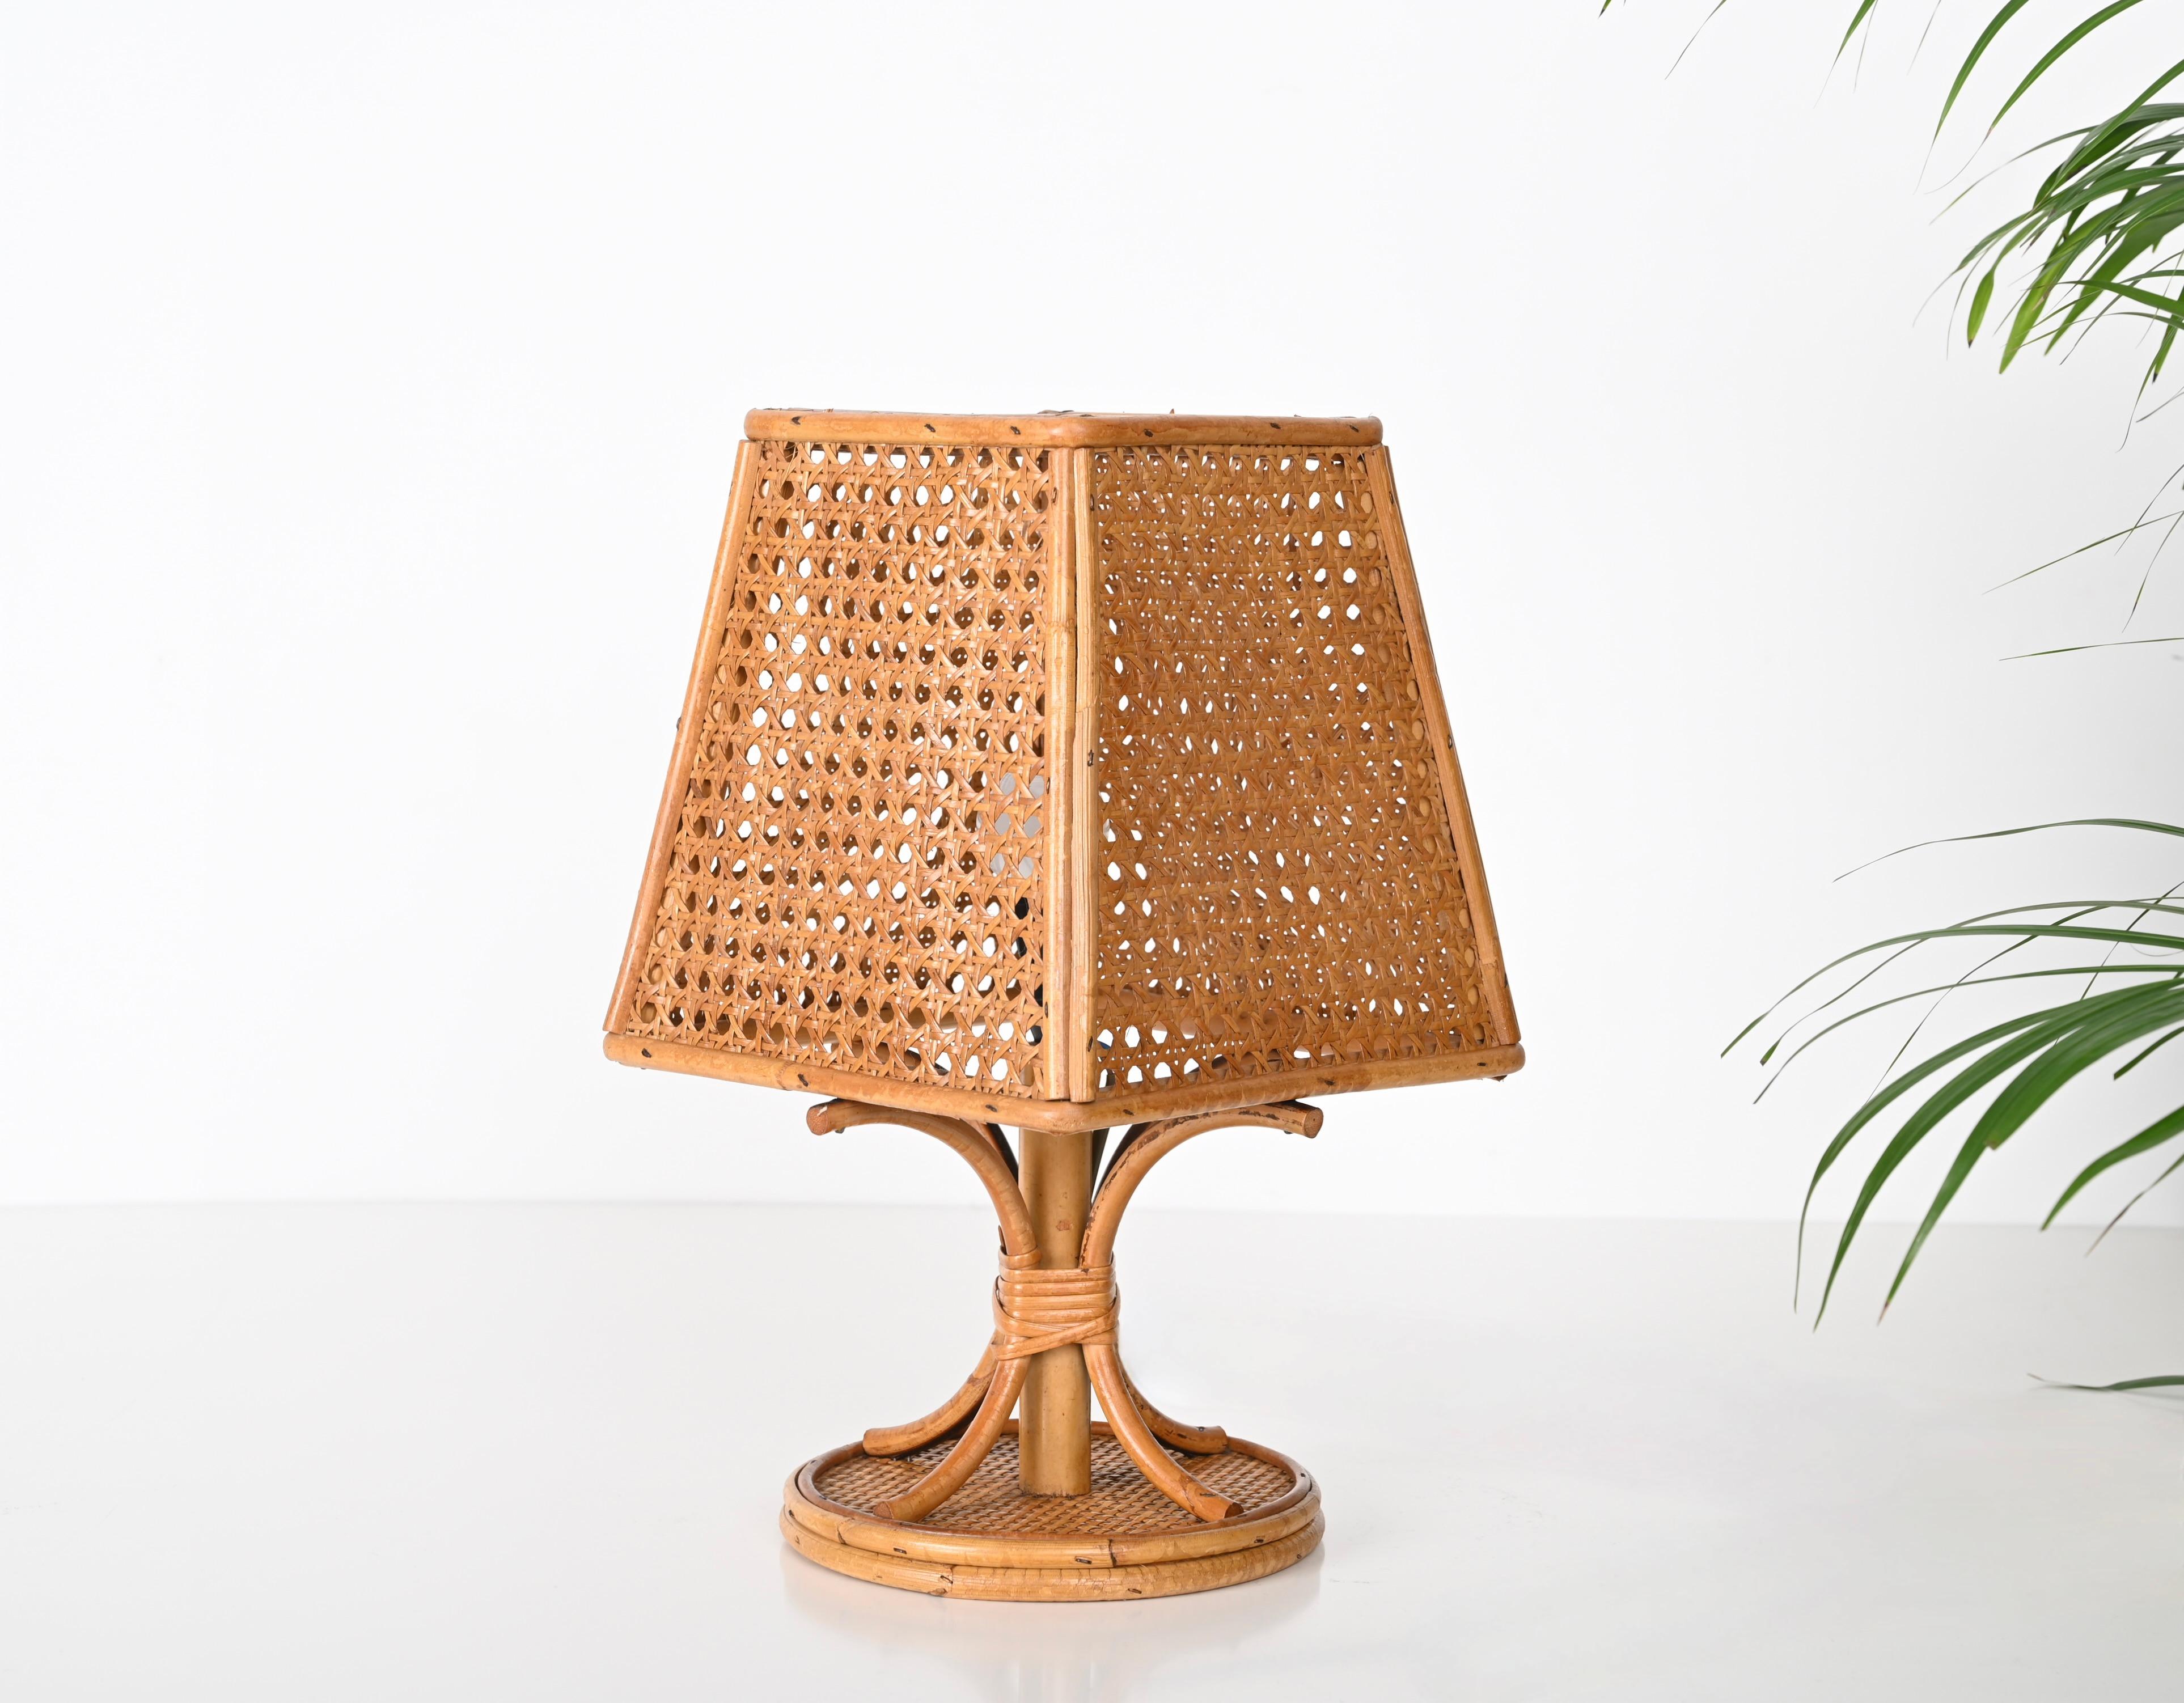 Italian Pair of French Riviera Table Lamps in Wicker and Rattan, Italy 1960s For Sale